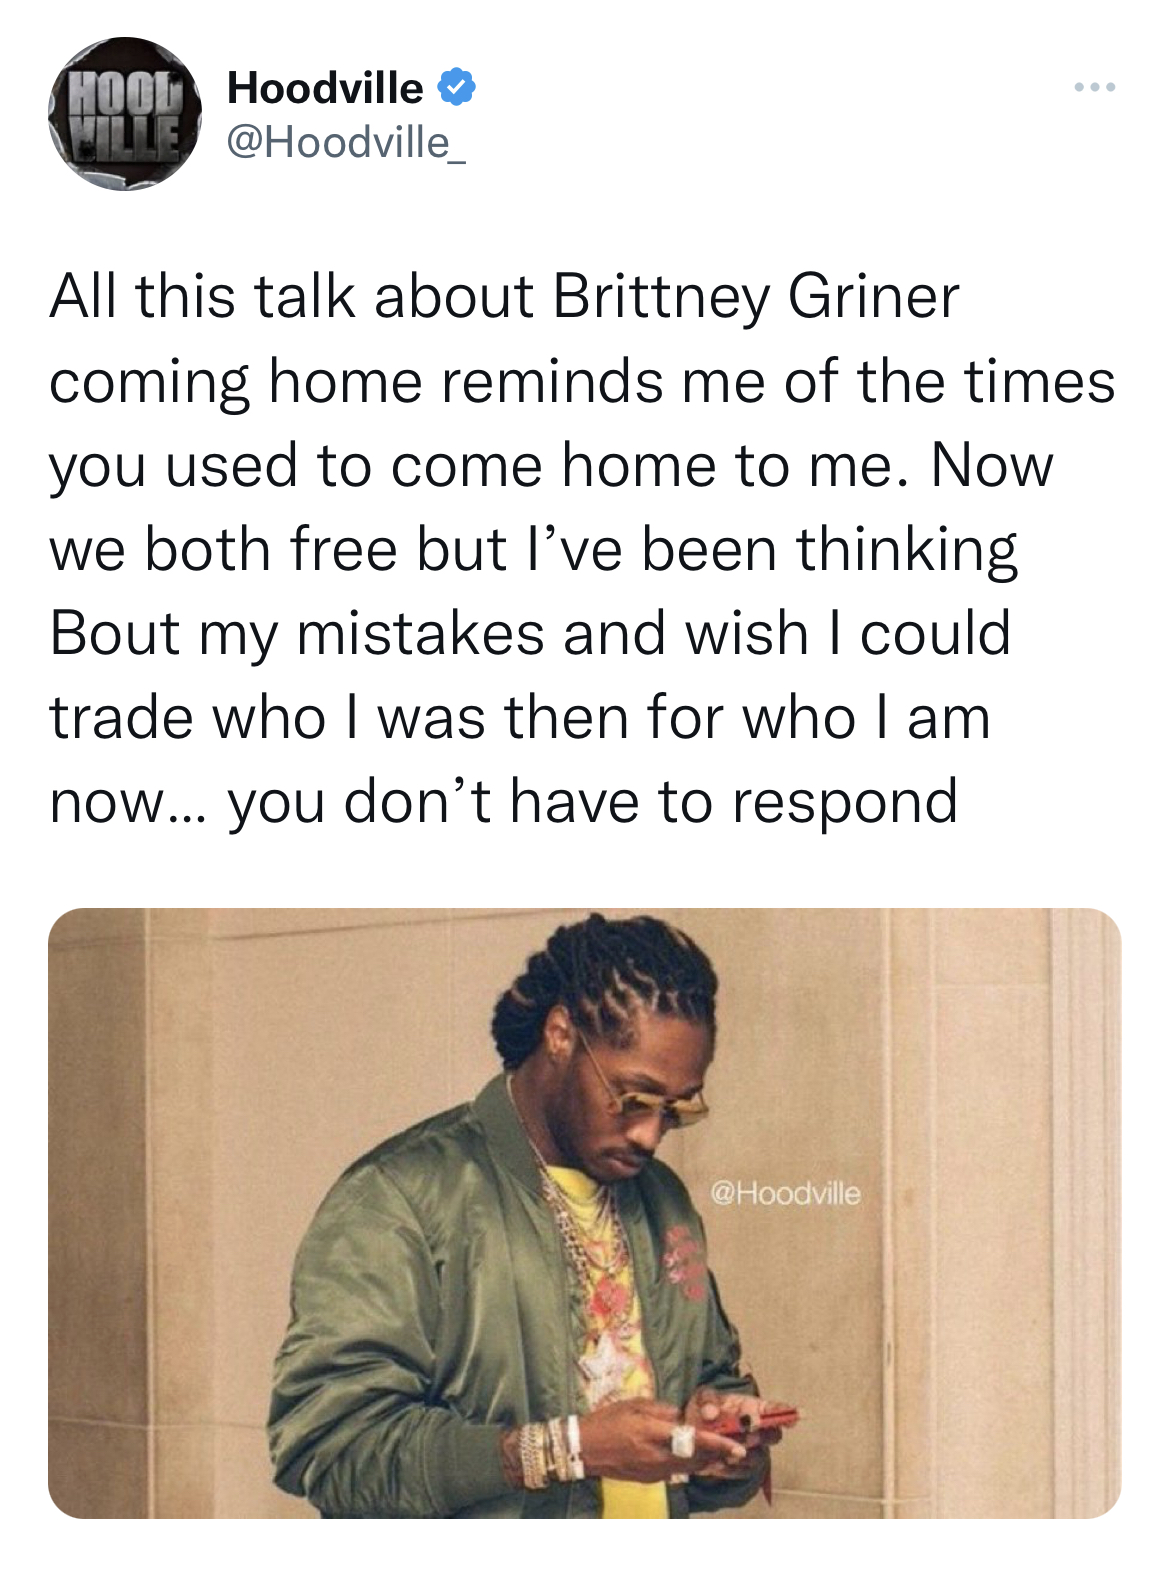 Brittney Griner Reactions - human behavior - Hool Hoodville Wille All this talk about Brittney Griner coming home reminds me of the times you used to come home to me. Now we both free but I've been thinking Bout my mistakes and wish I could trade who I wa